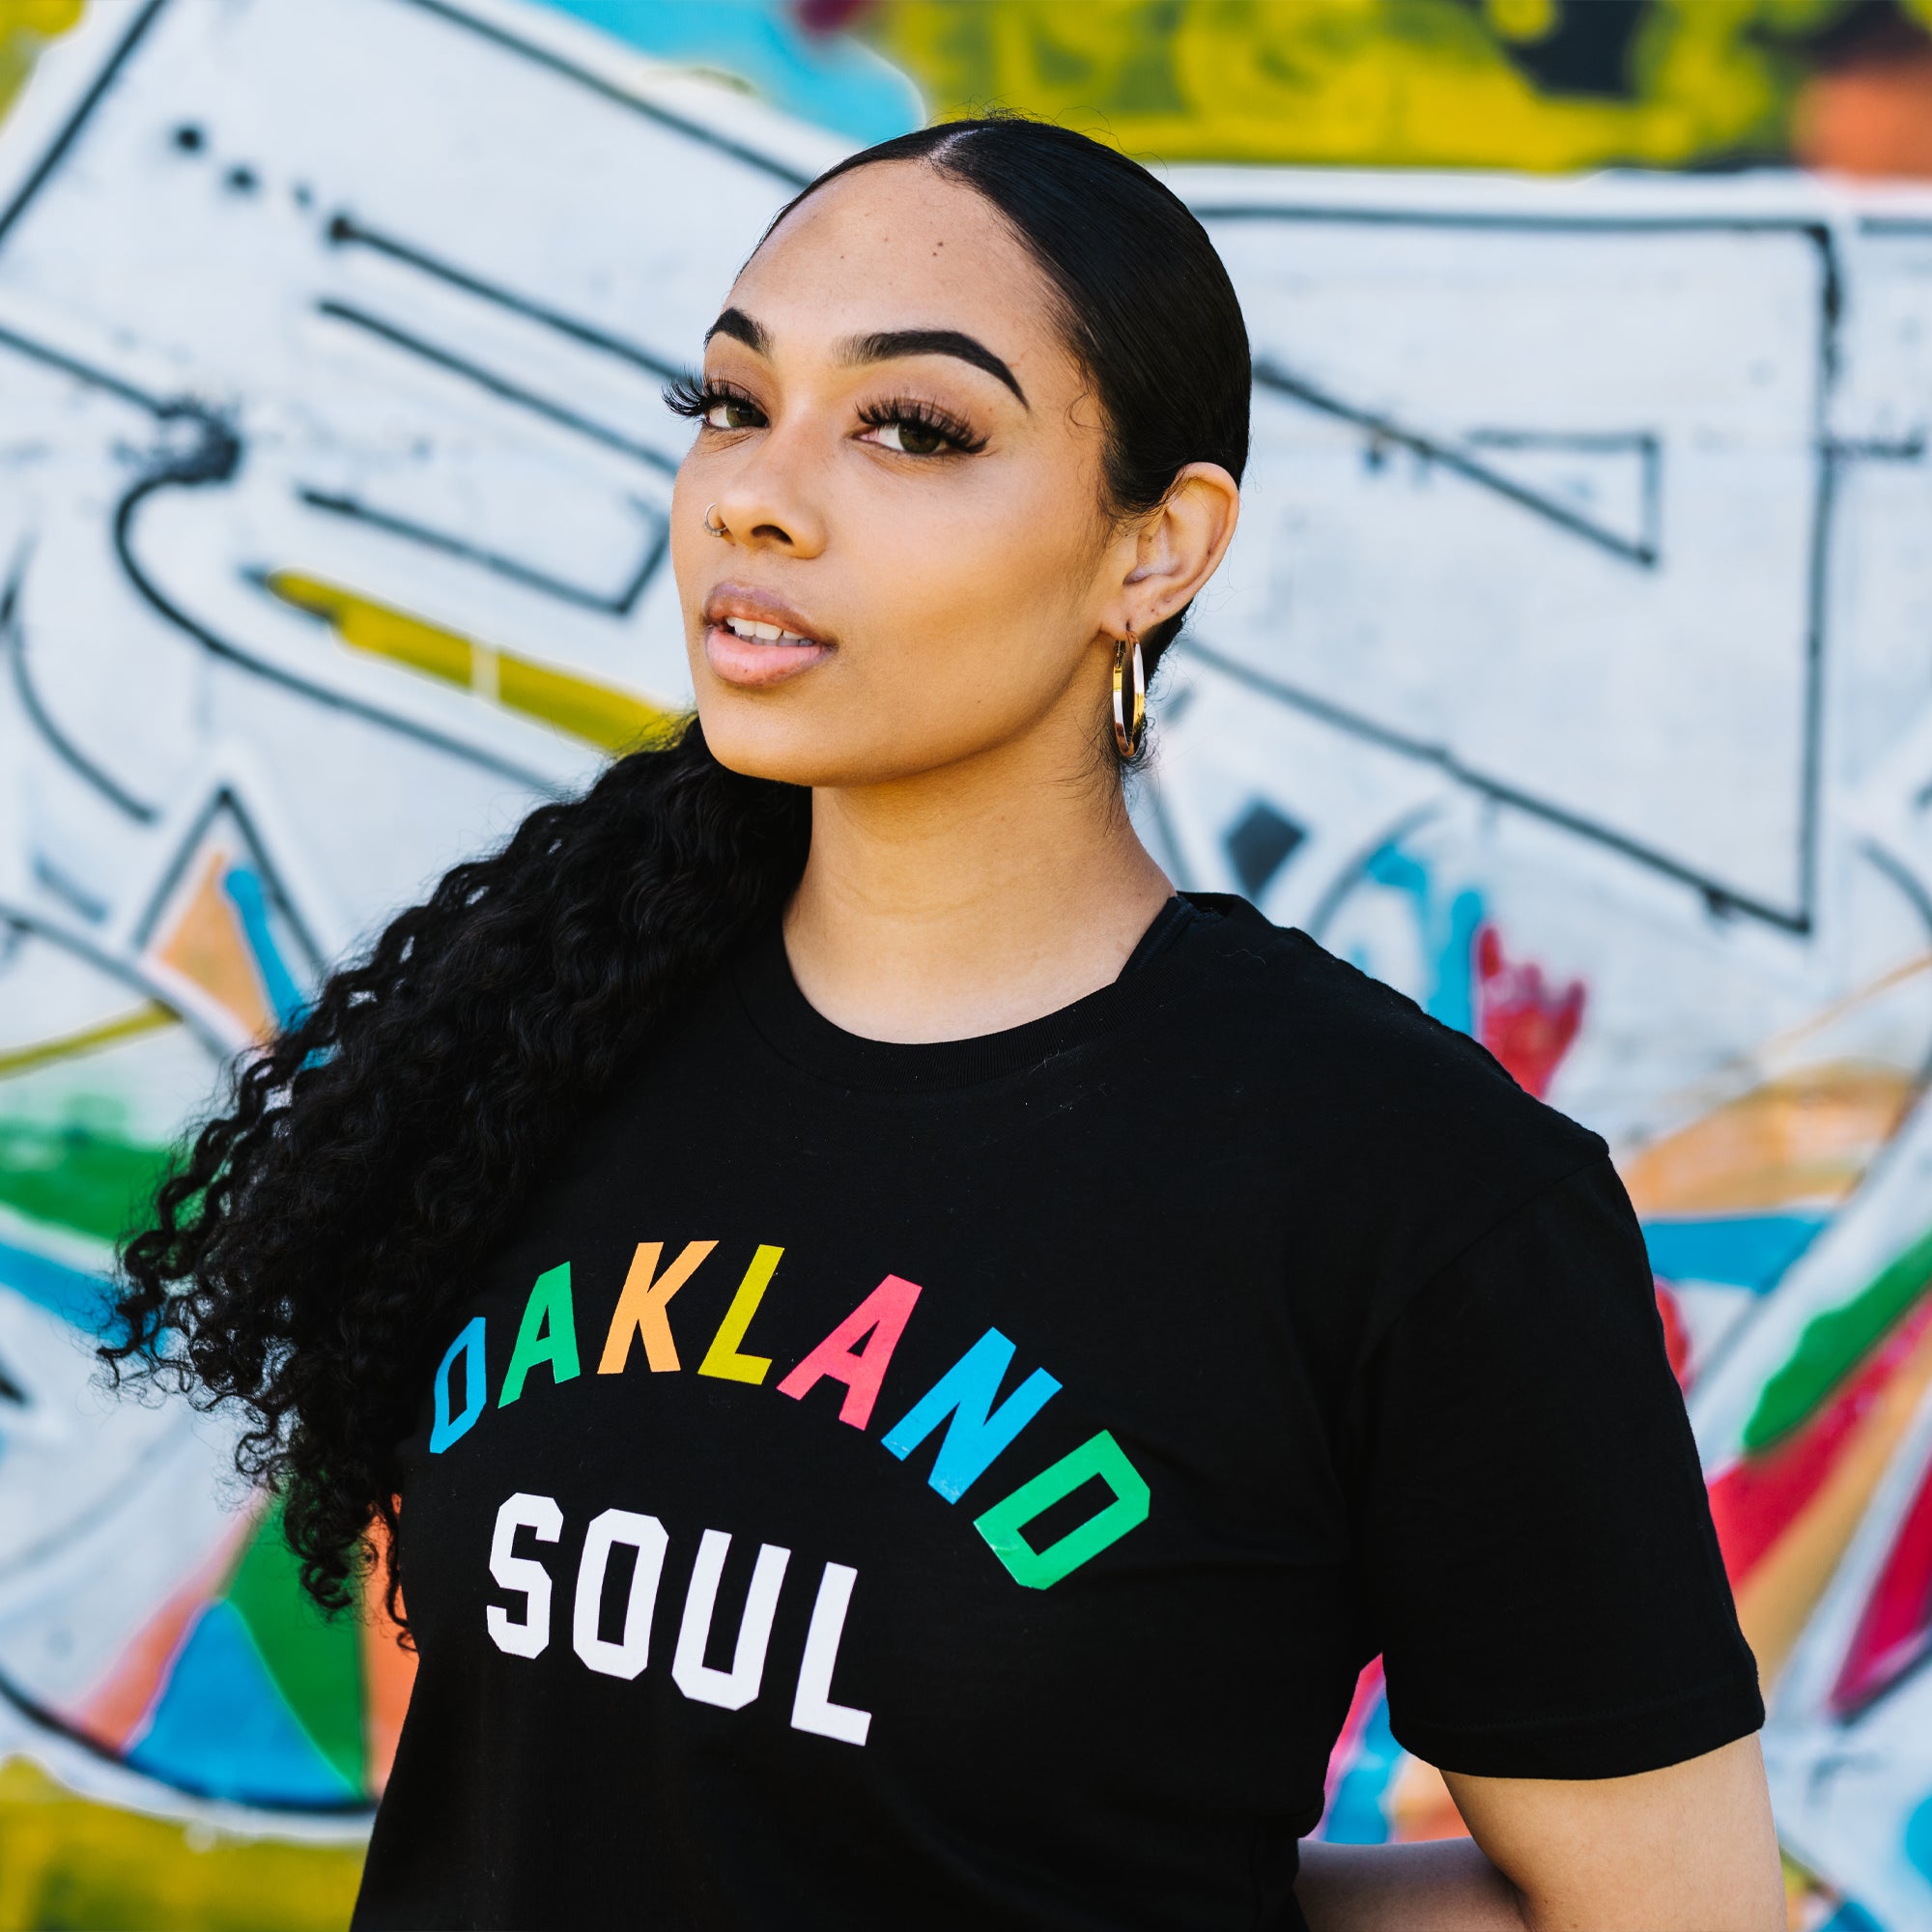 Front view of woman from waist up wearing black t-shirt with full color Oakland Soul wordmark logo. Blurred graffiti background.